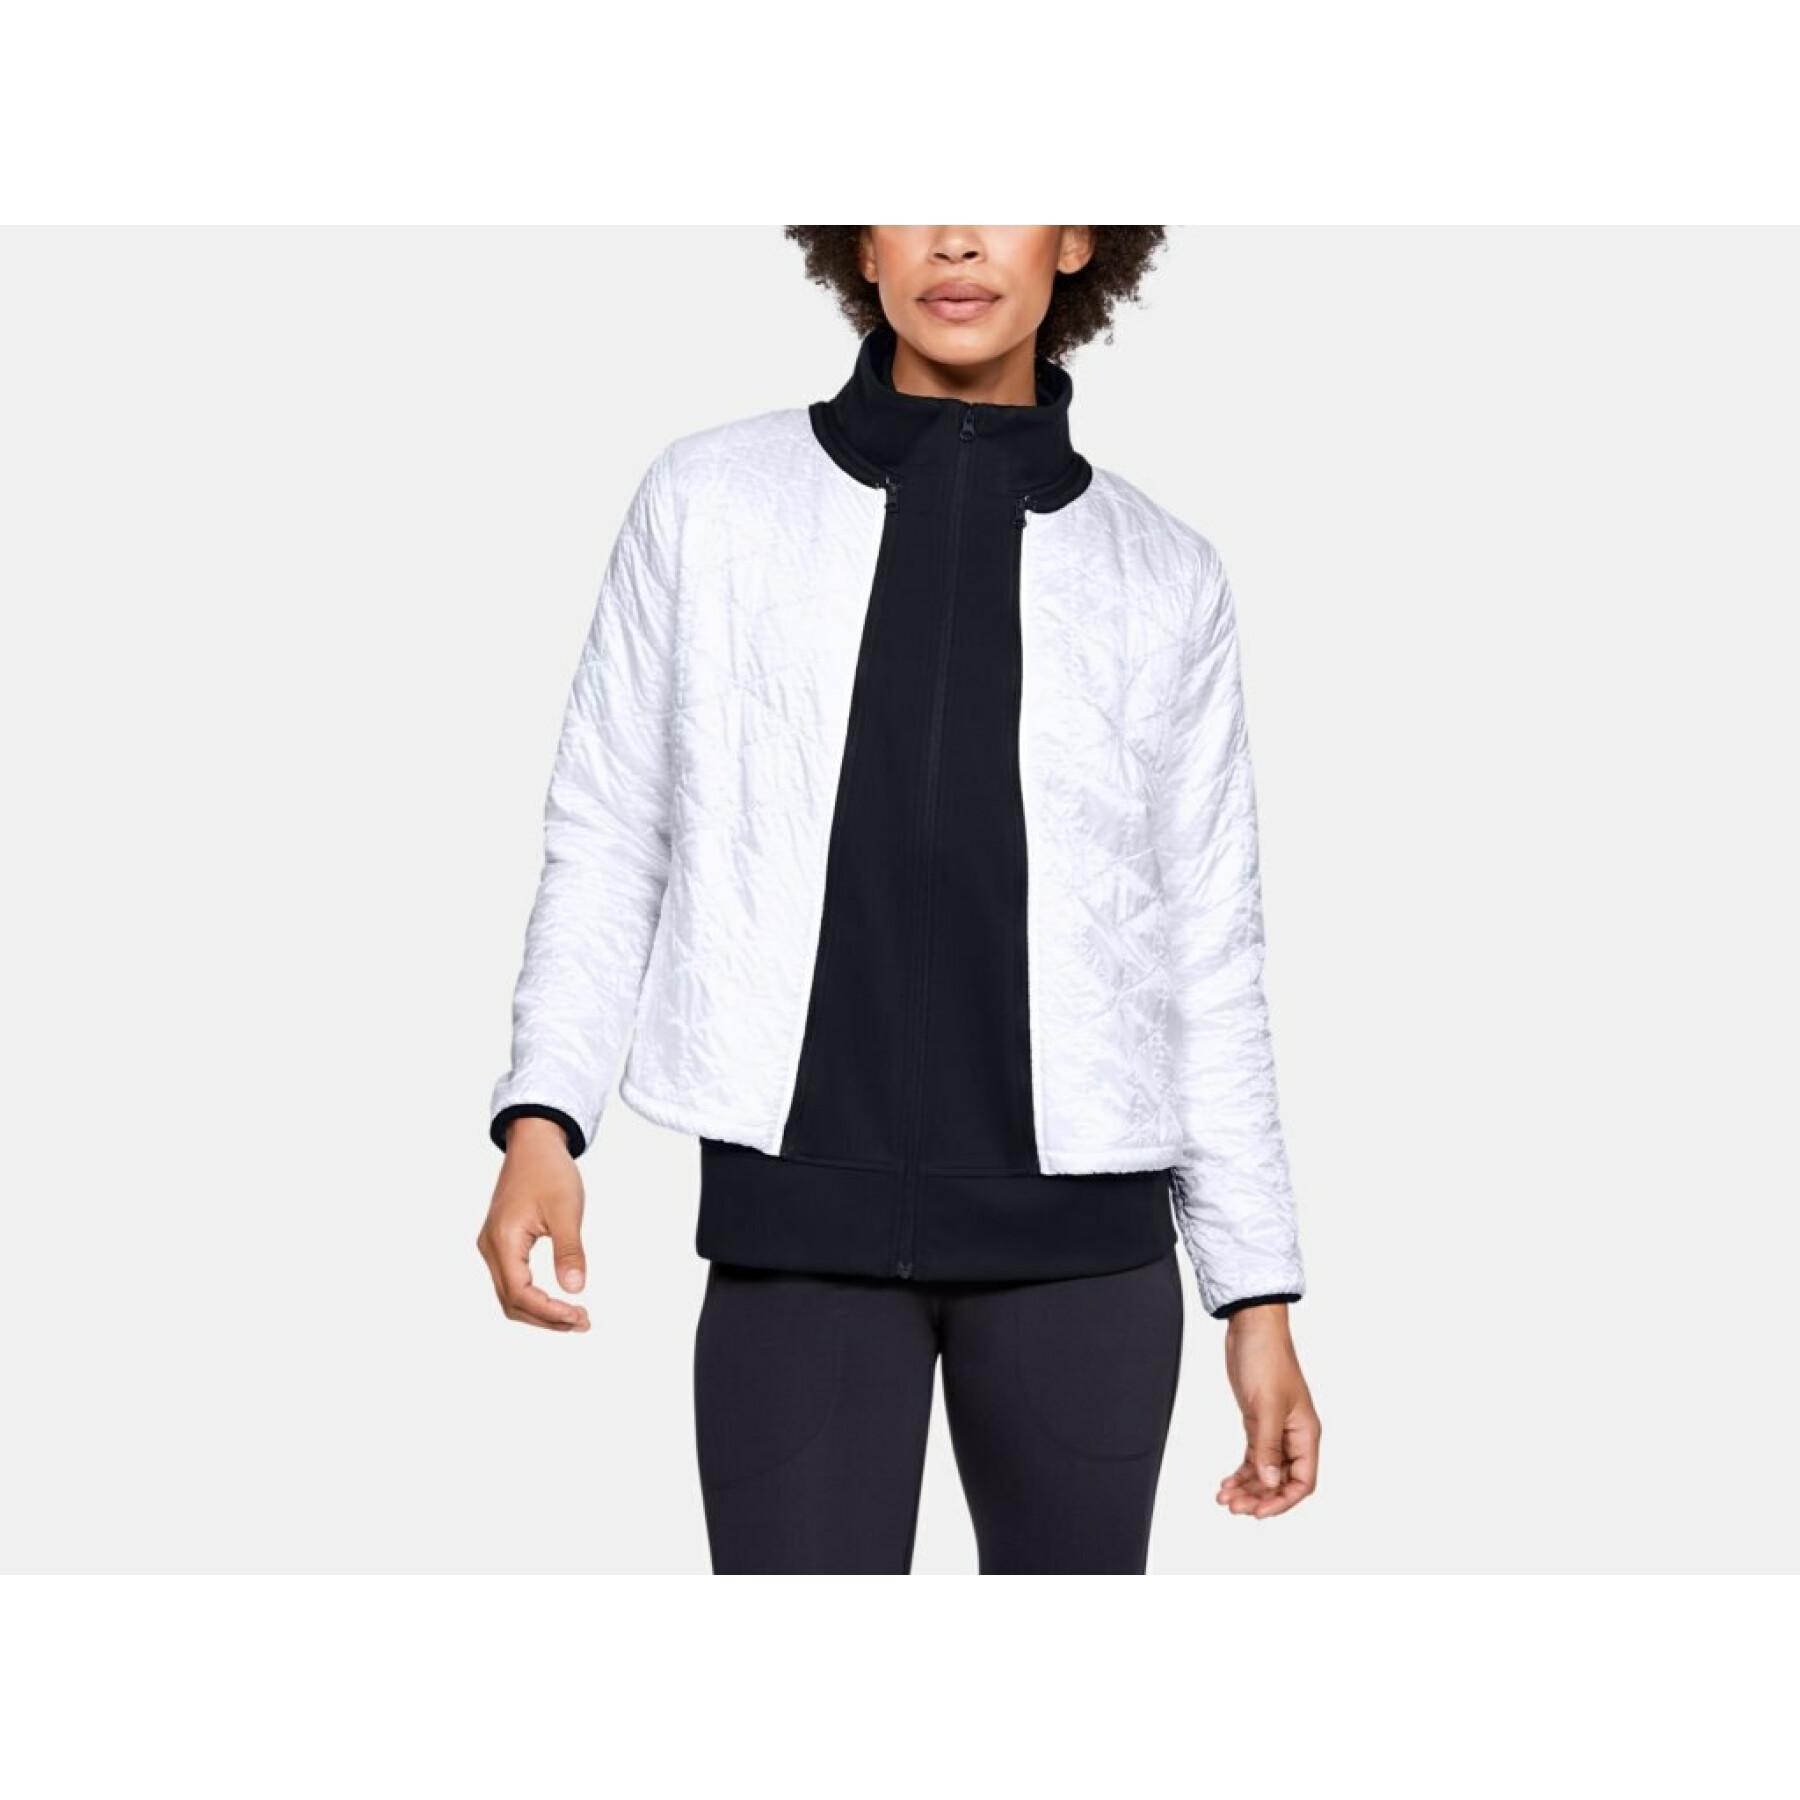 Women's jacket Under Armour Perpetual Storm